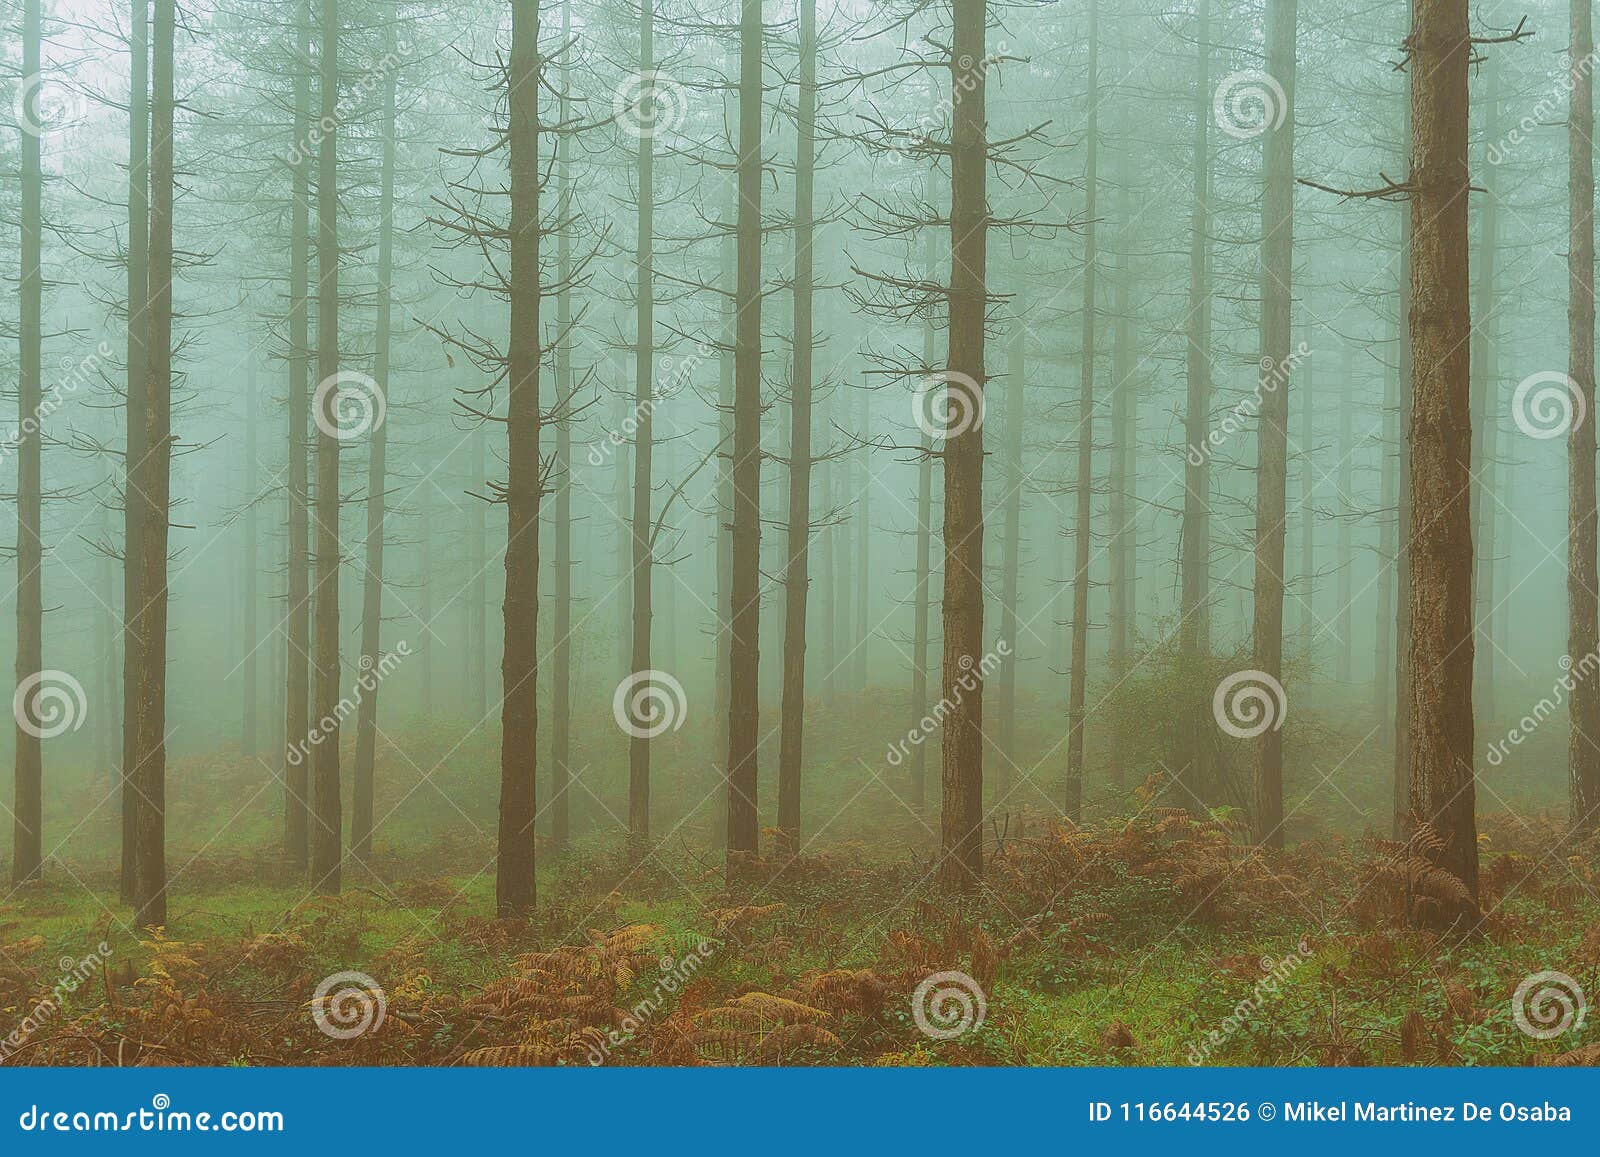 vintage conifer forest with bare tree trunks and fog